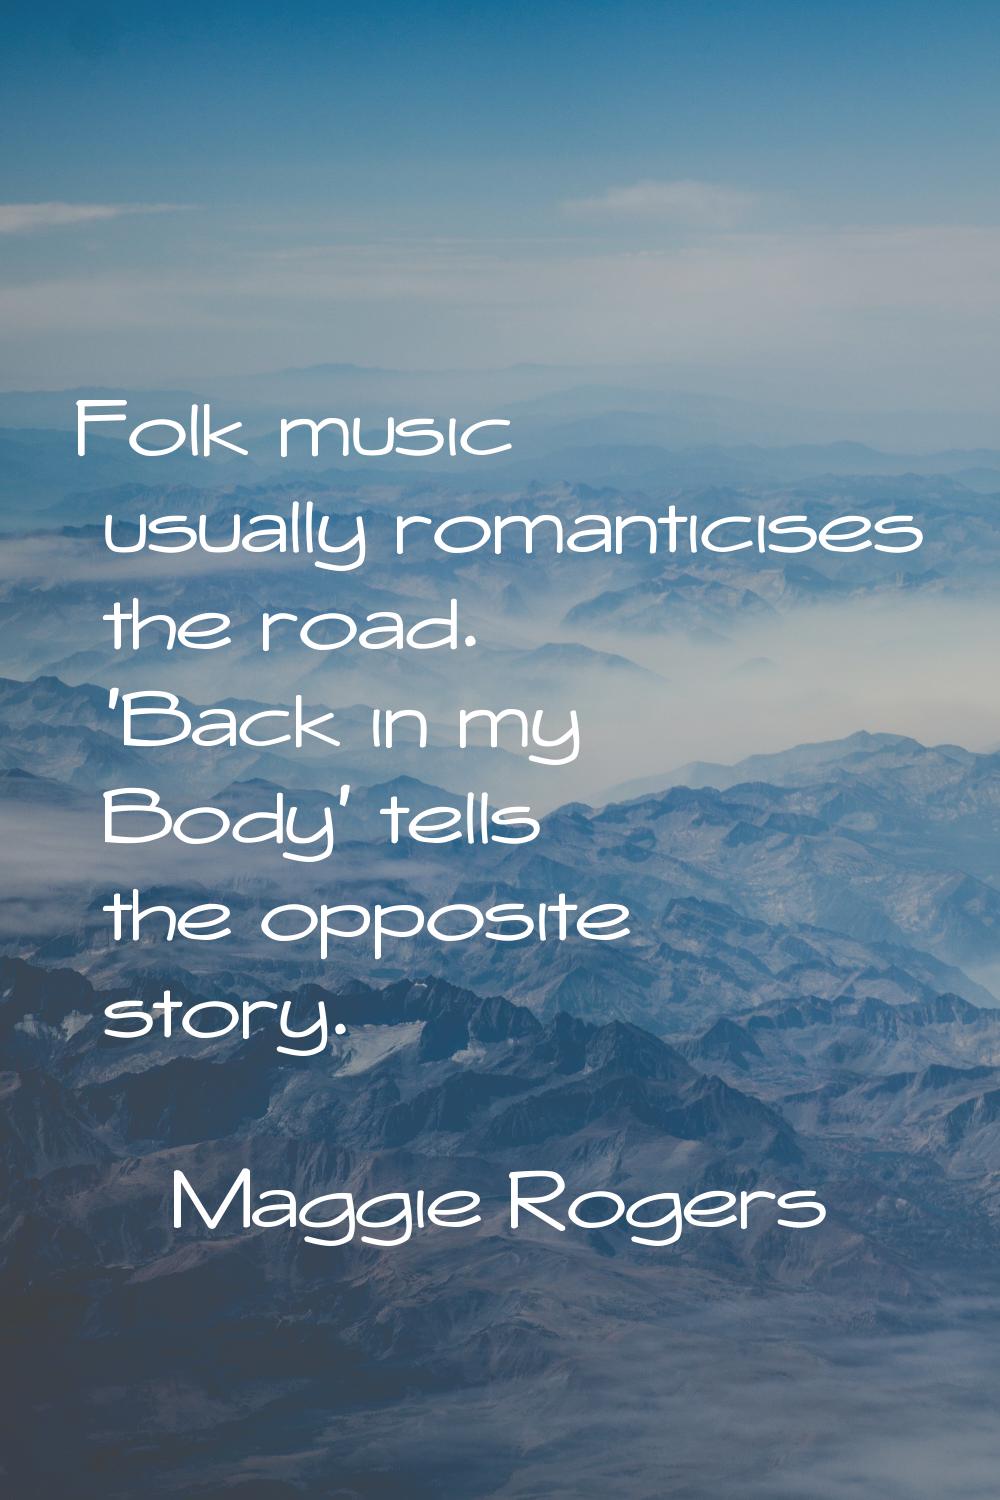 Folk music usually romanticises the road. 'Back in my Body' tells the opposite story.